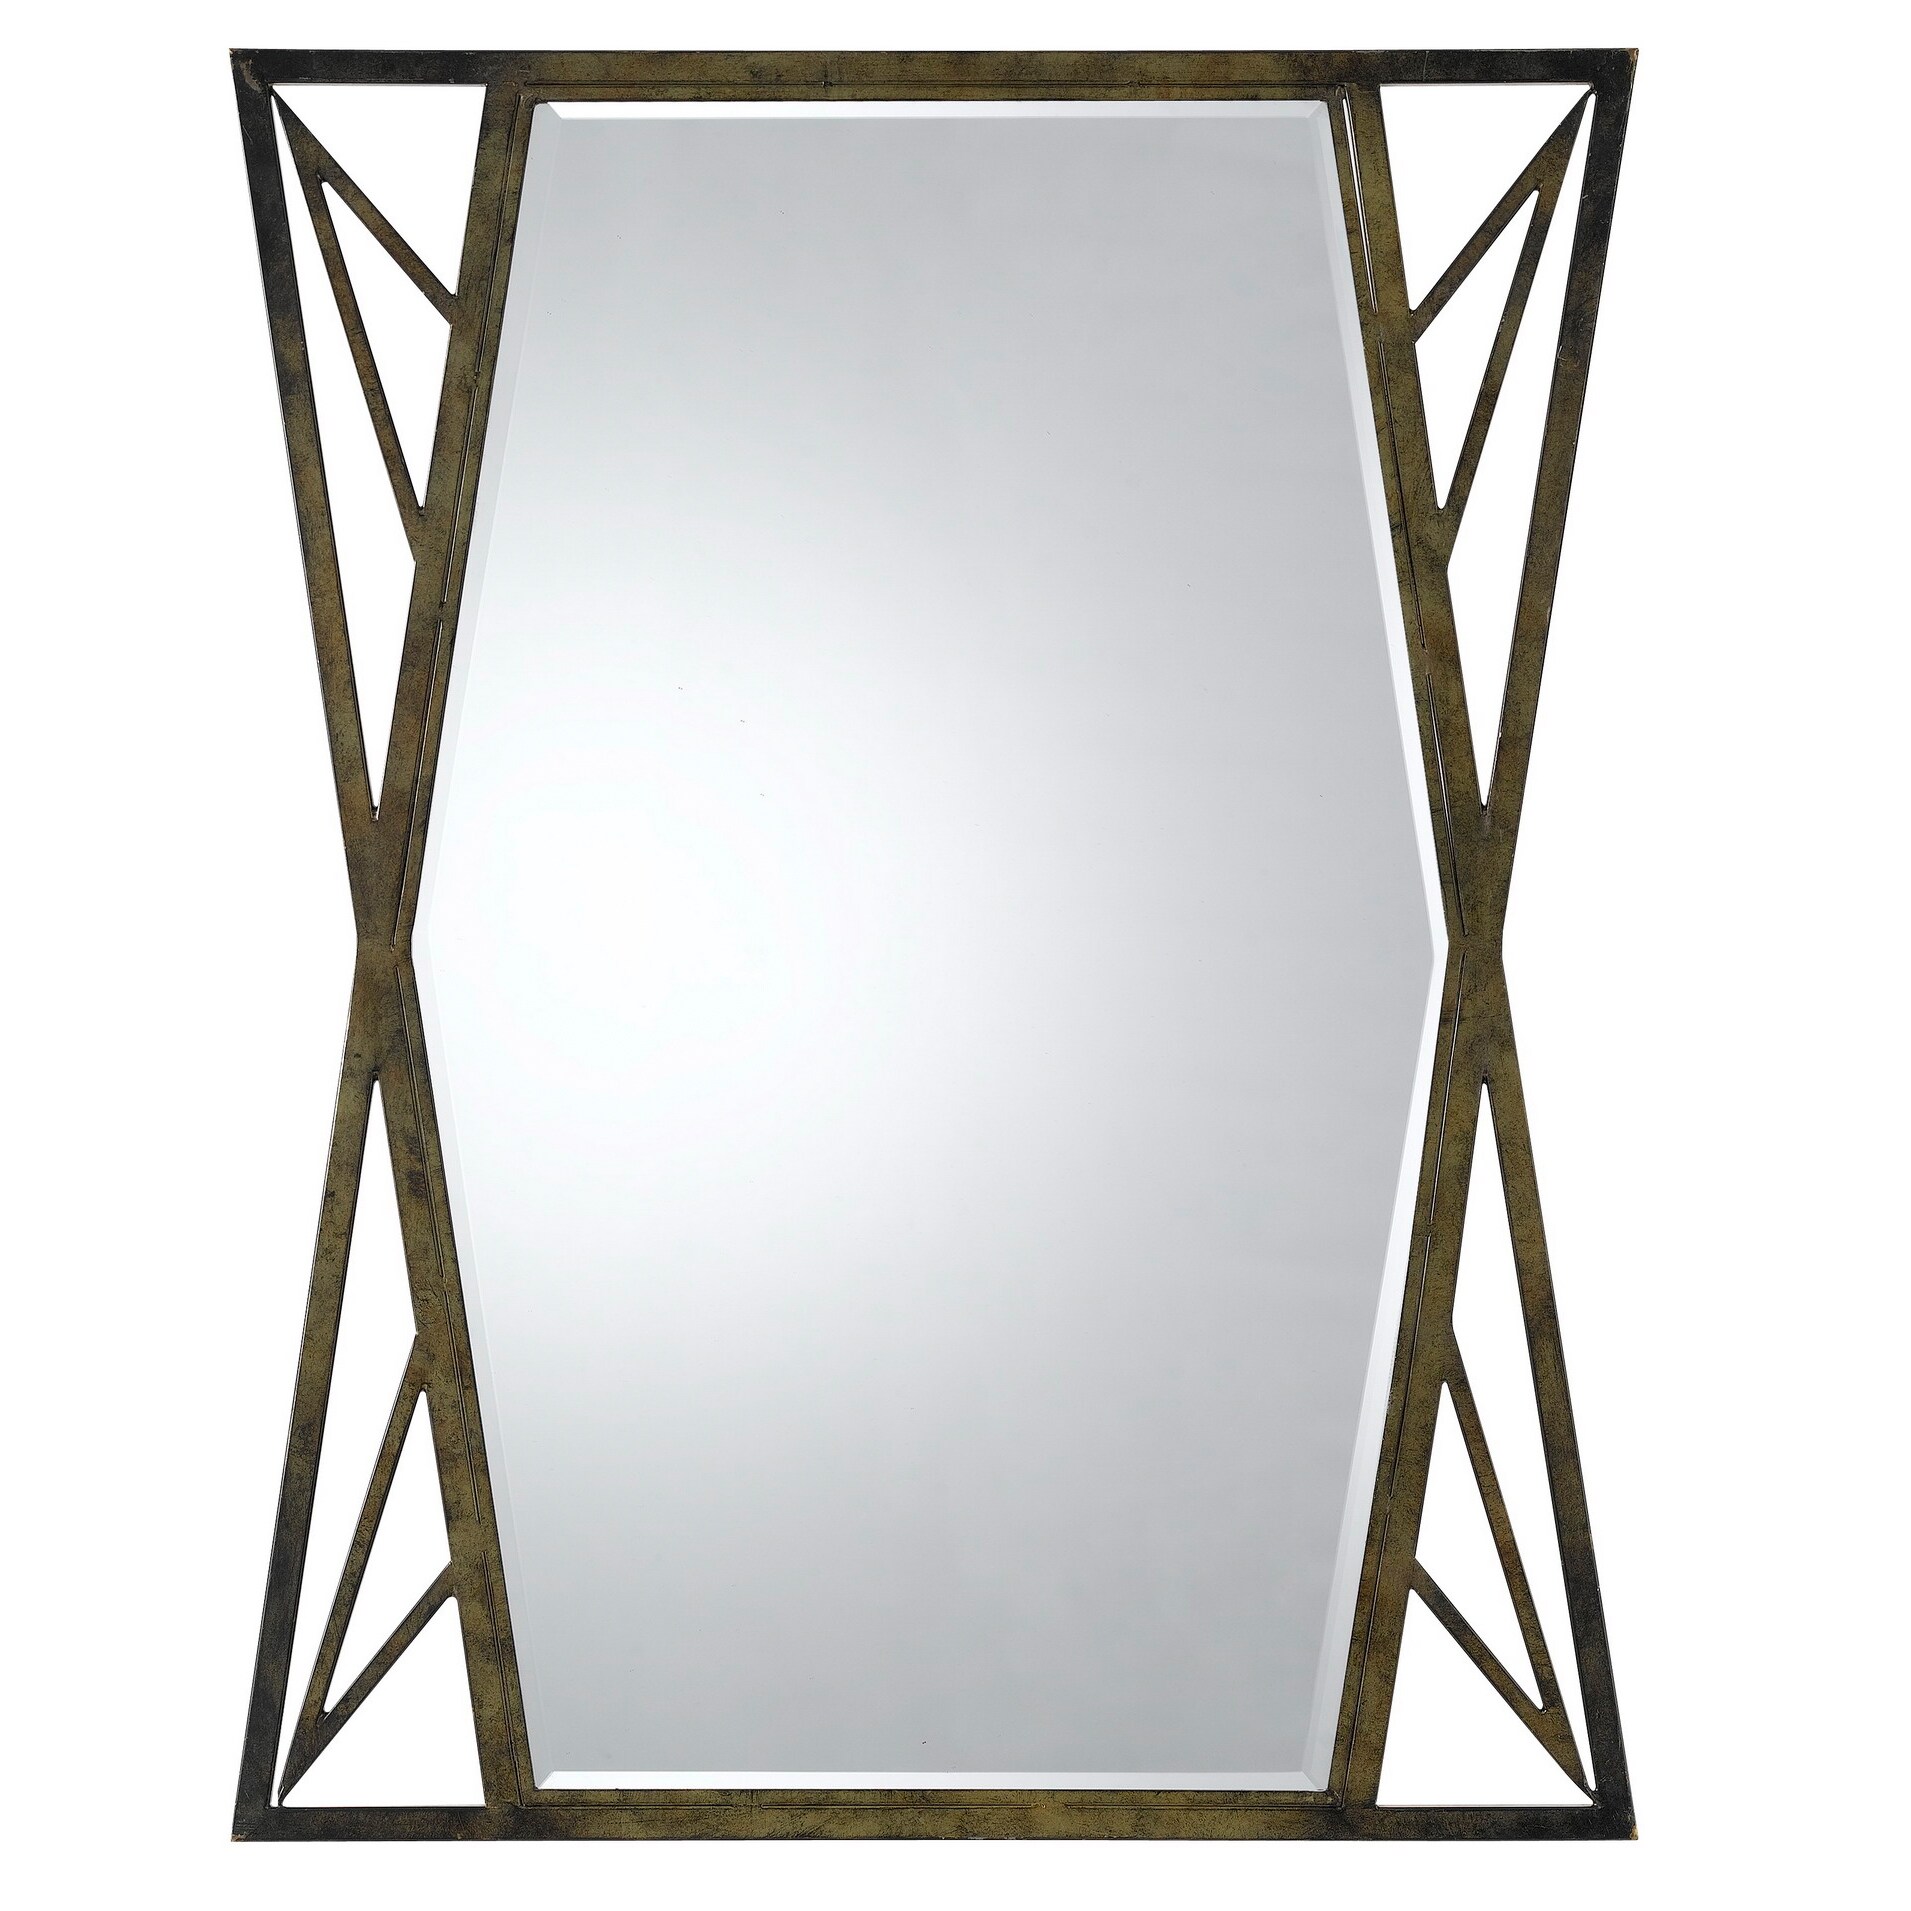 Cal Lighting Pavia Metal Beveled Glass Mirror (Dark bronzeMaterials Metal/ beveled glassTransitional designDimensions 32 inches high x 25 inches wide x 1 inch deep )